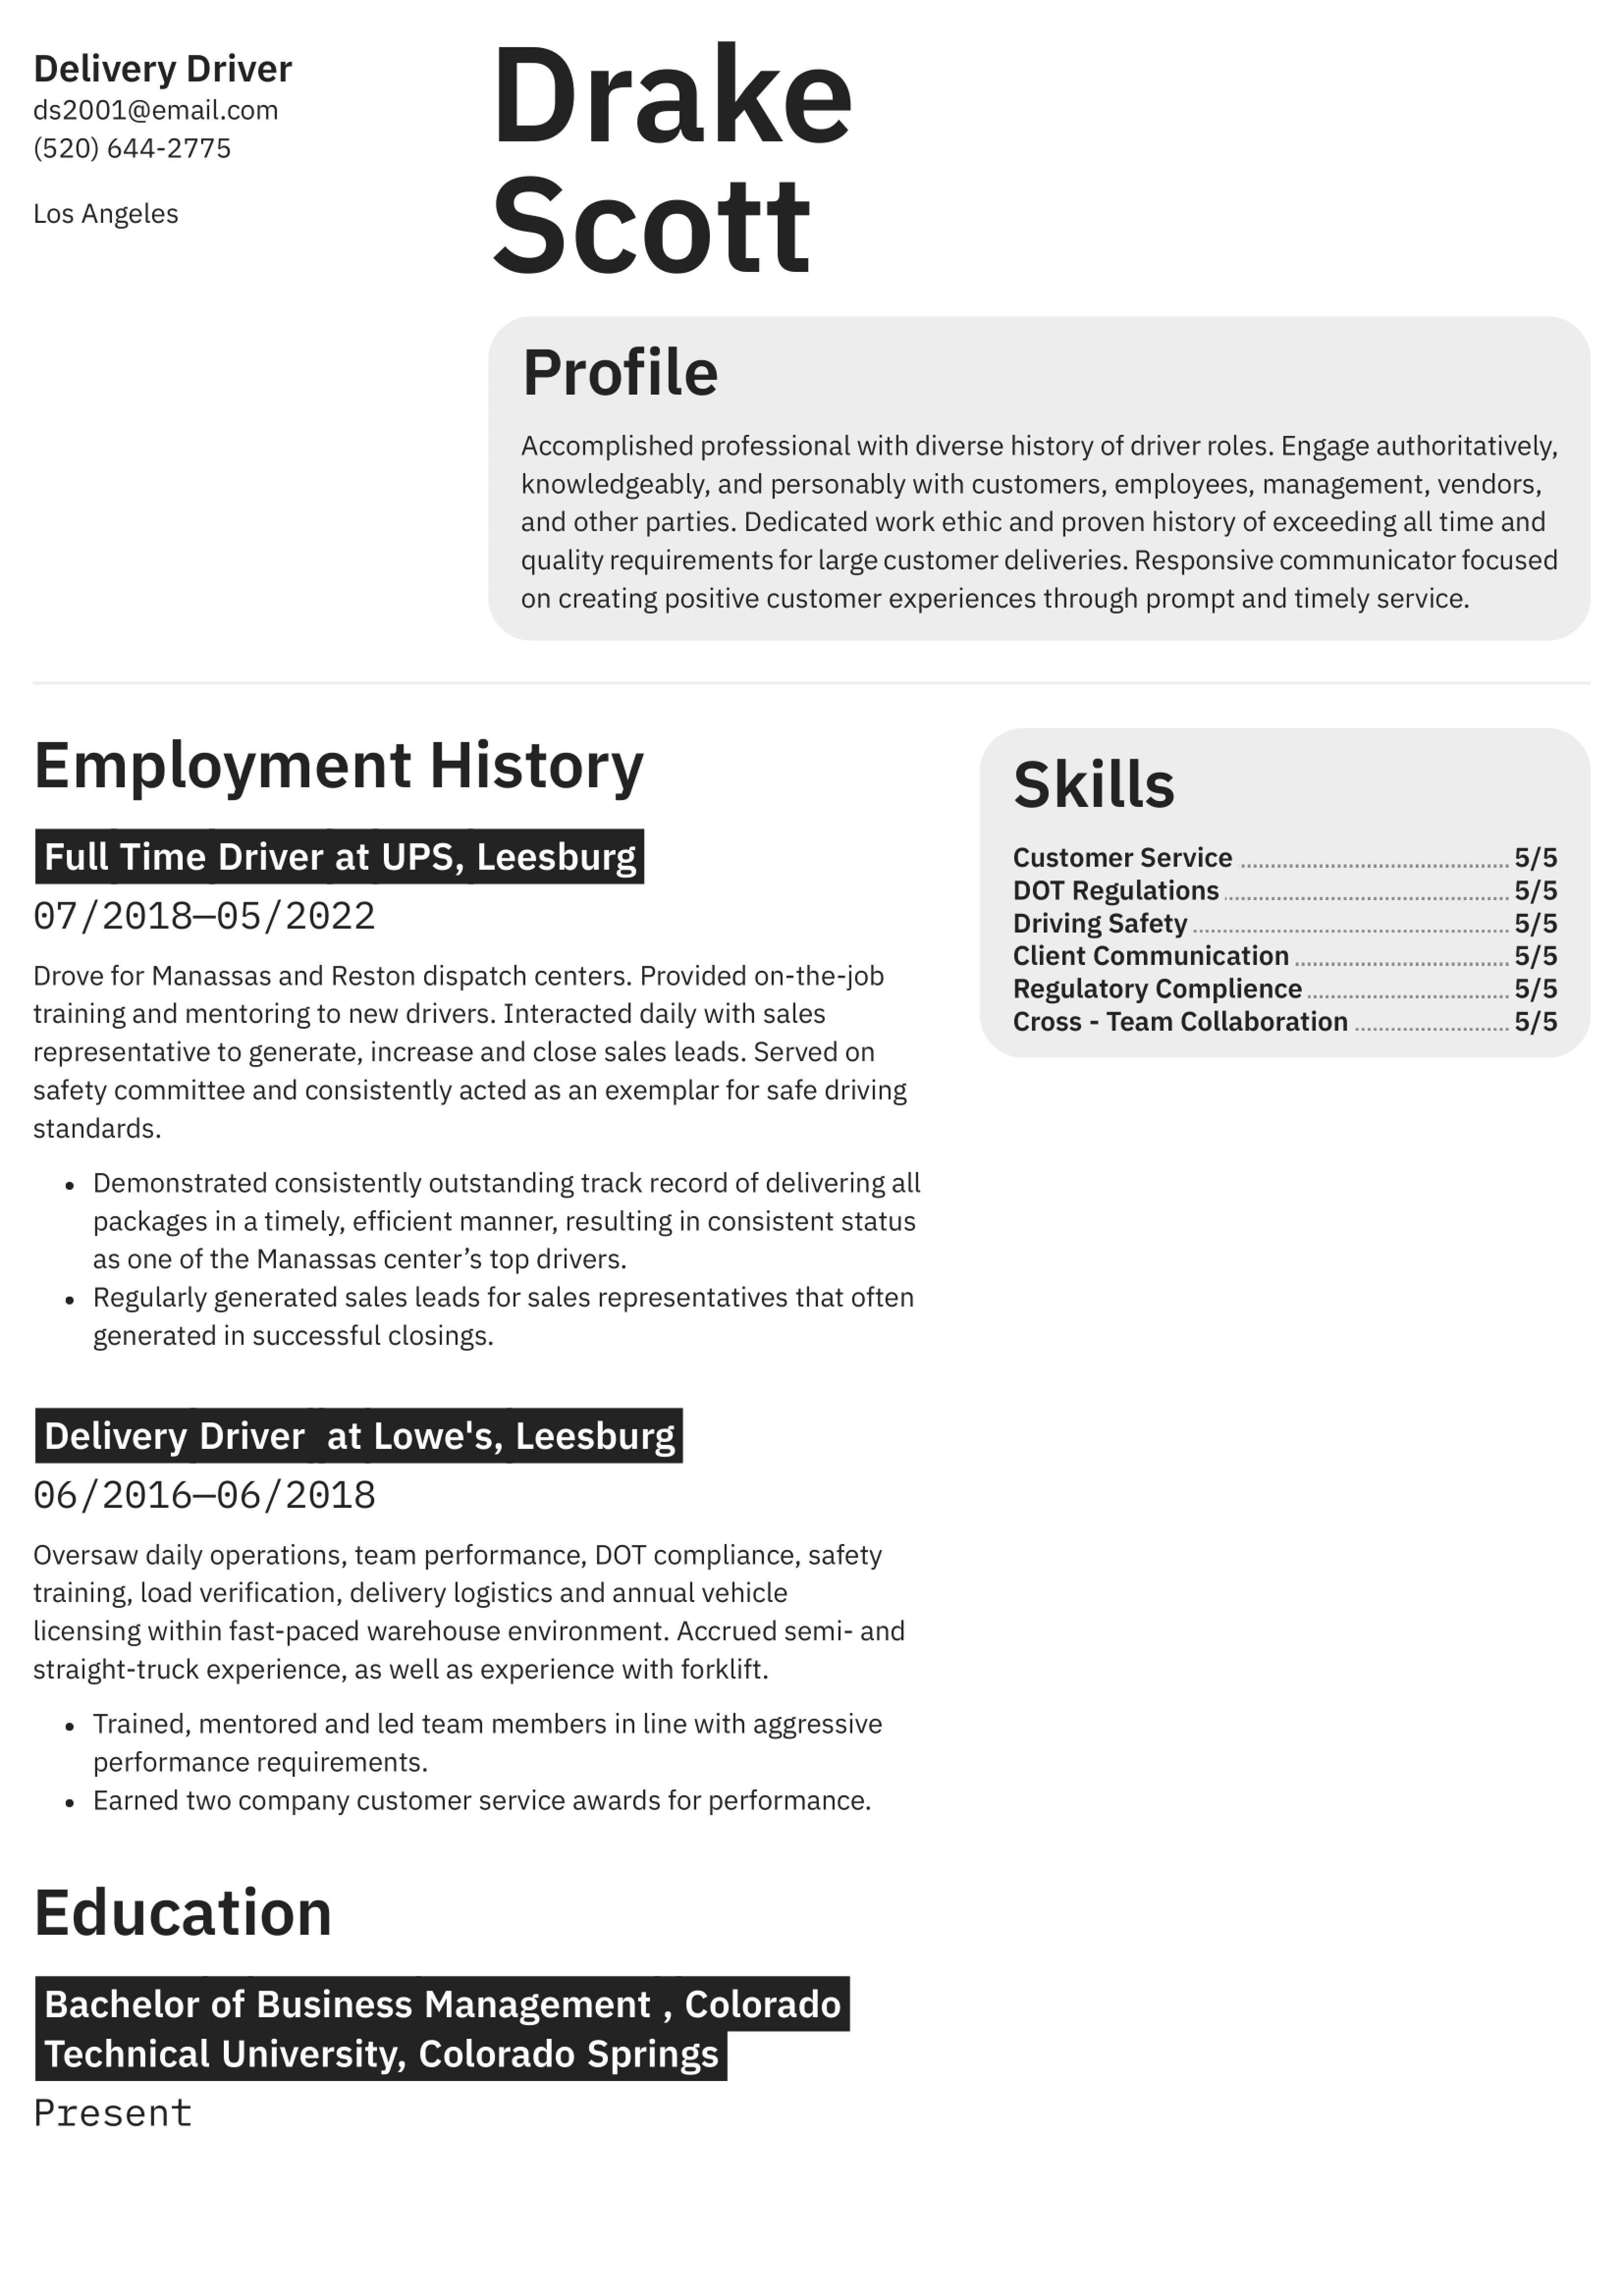 delivery-driver-resume-example.png